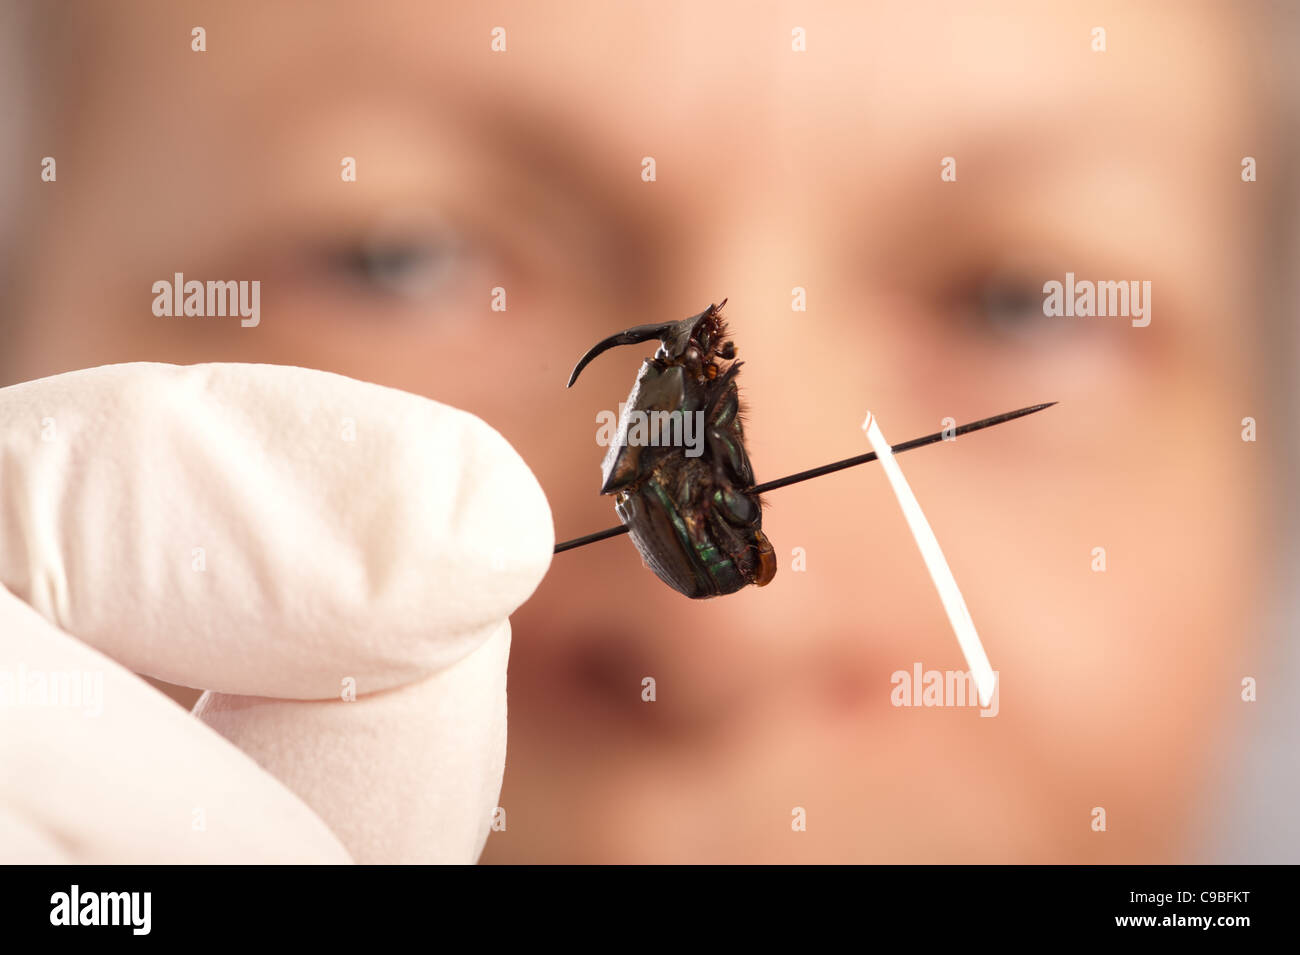 Scientist studying a beetle in a lab Stock Photo